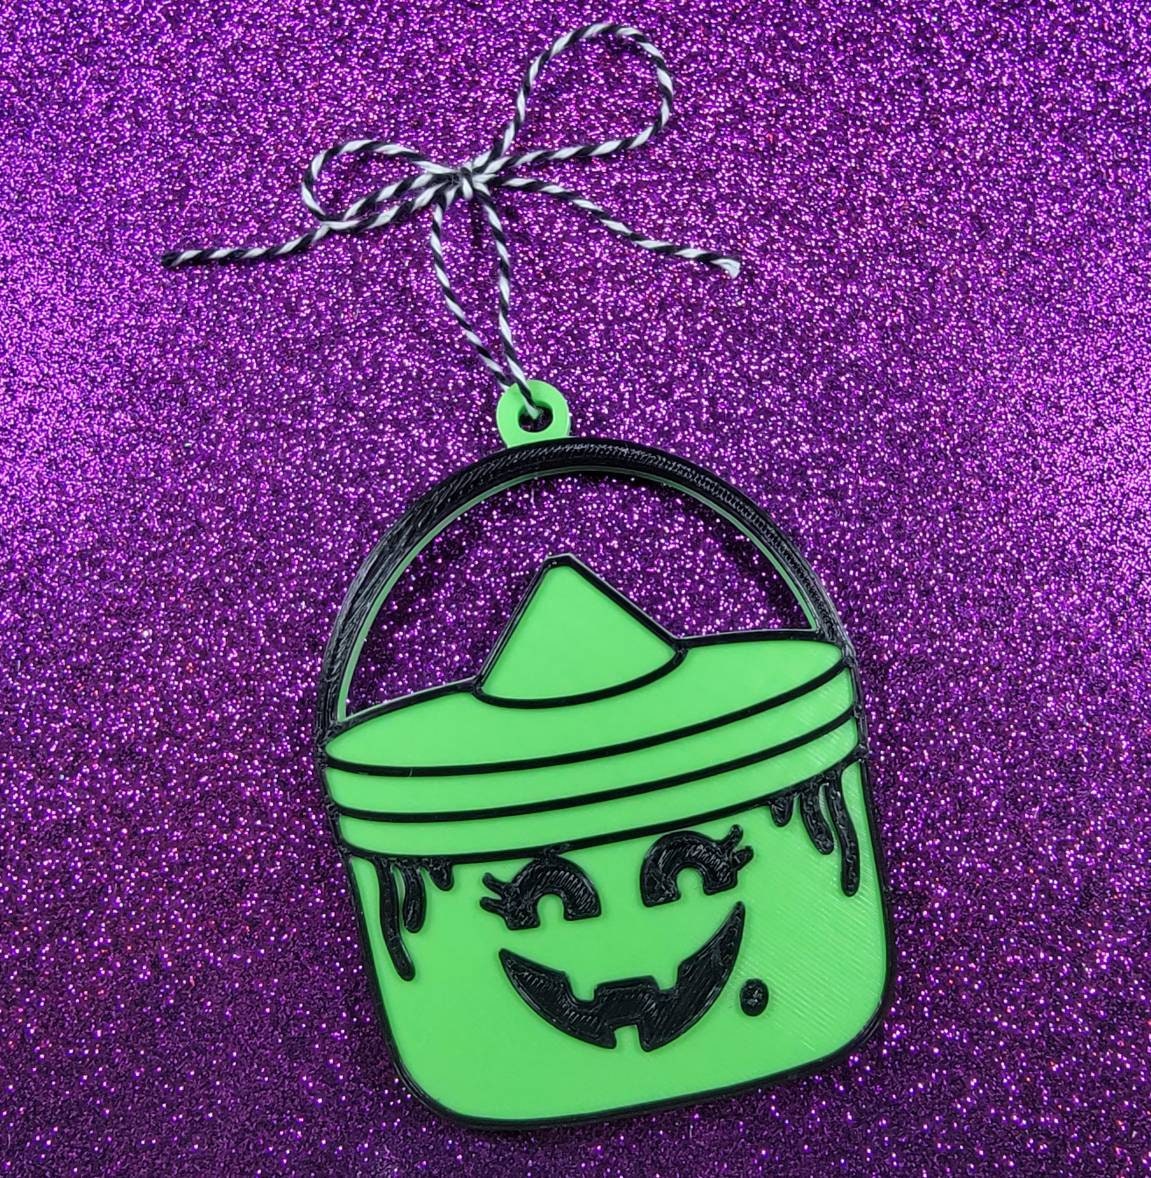 Halloween Witch Bucket 3D Printed Spooky Christmas Ornament